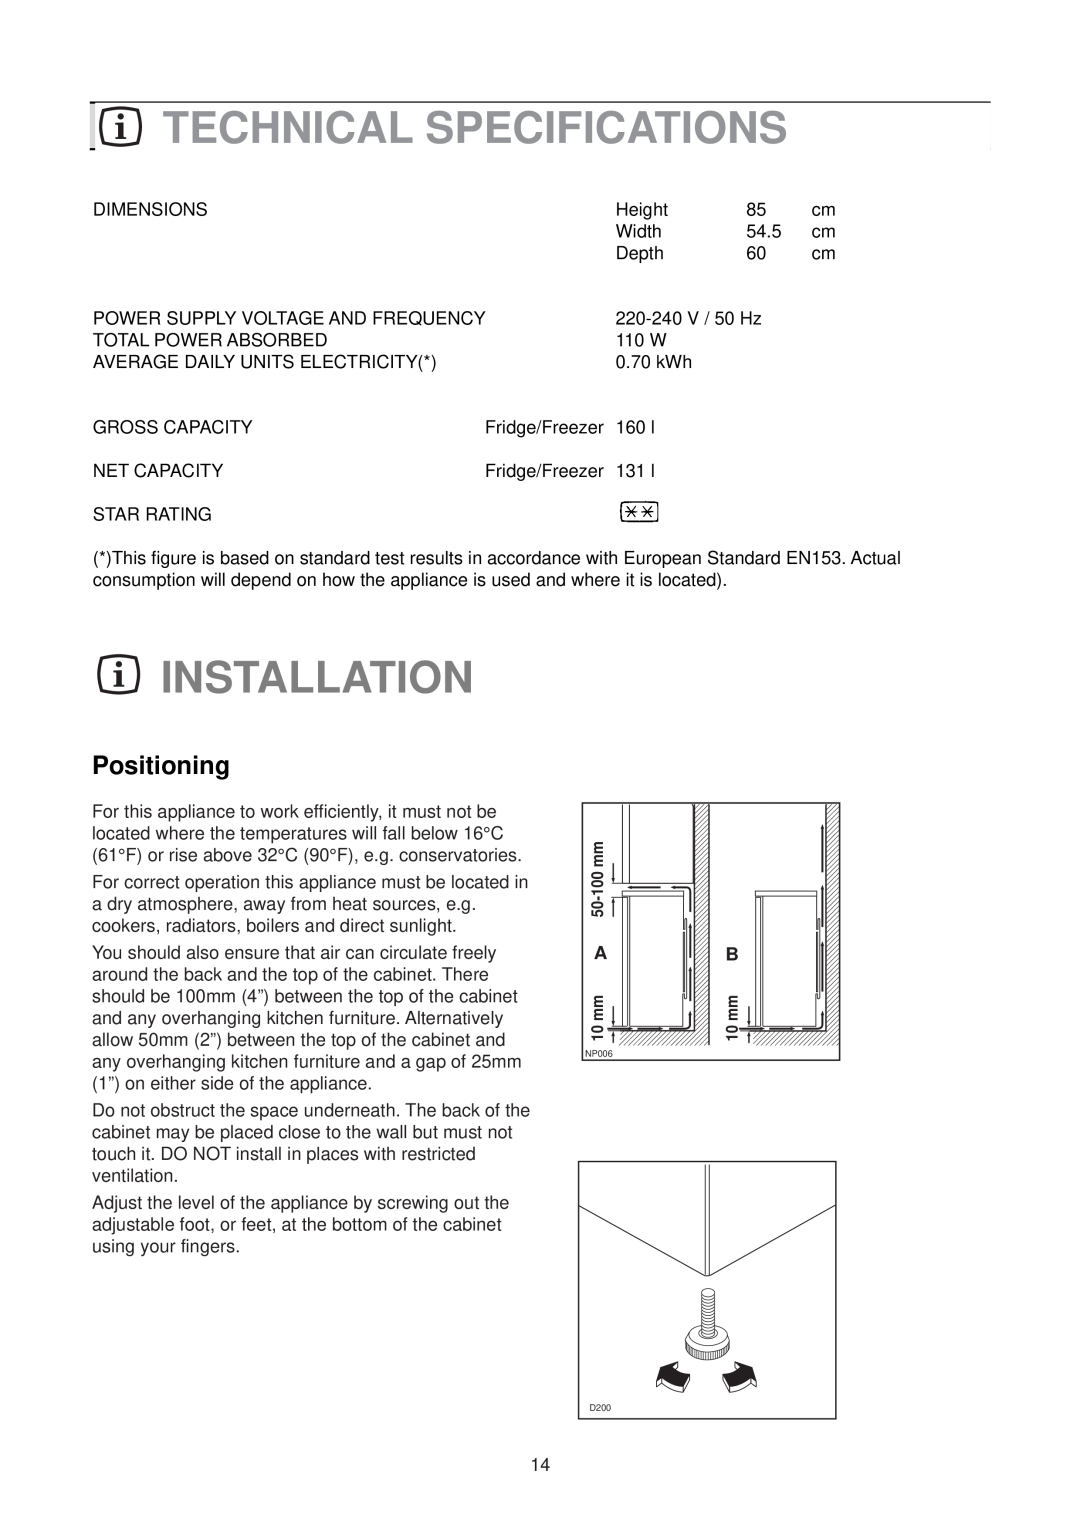 Zanussi ZT 56/2 R manual Technical Specifications, Installation, Positioning 